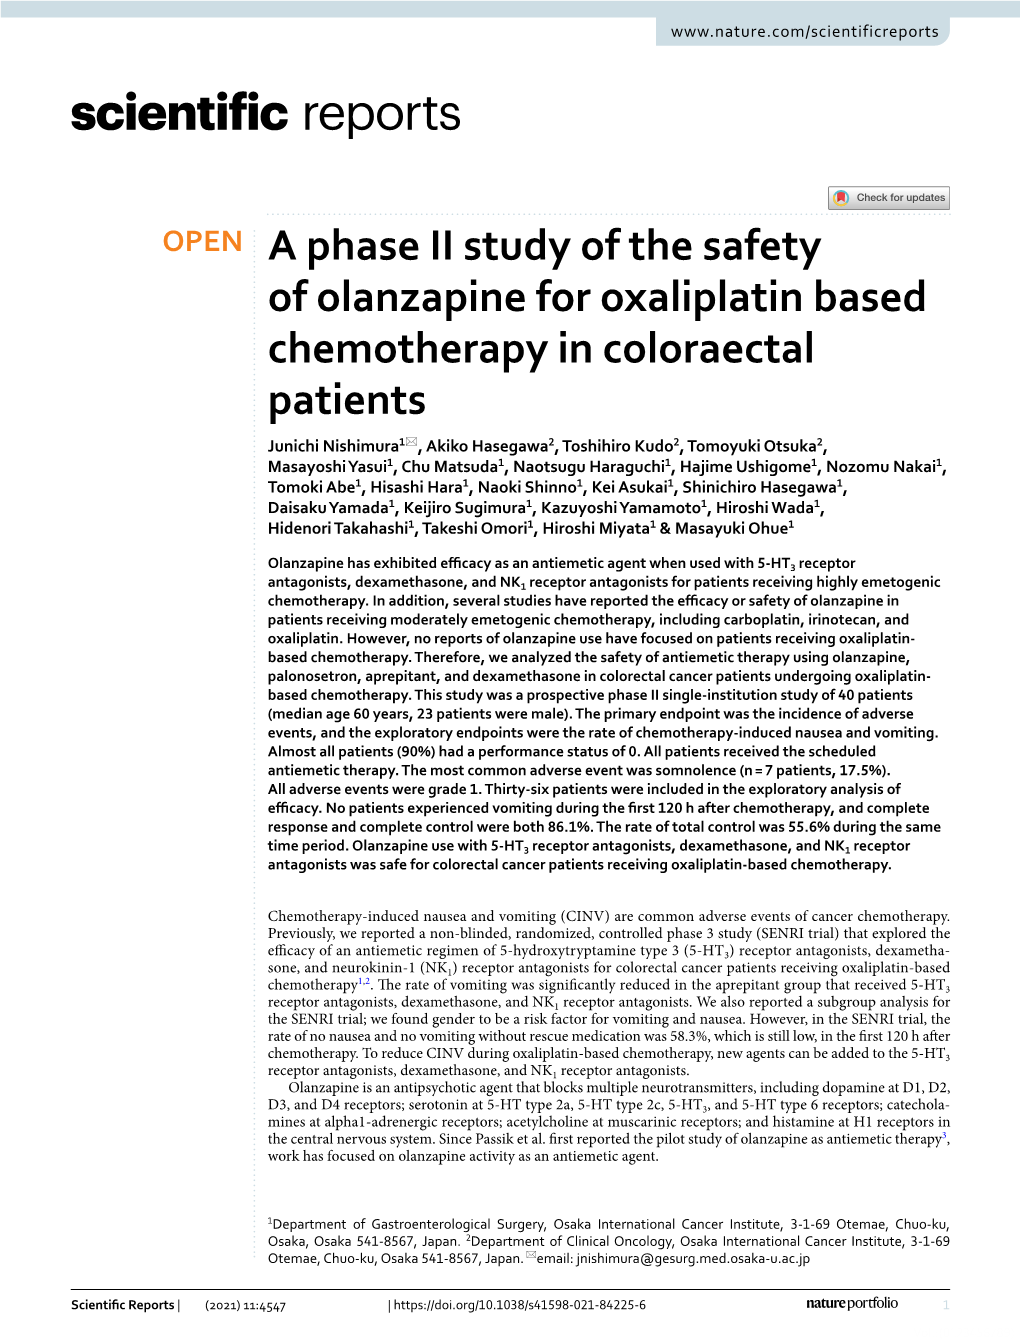 A Phase II Study of the Safety of Olanzapine for Oxaliplatin Based